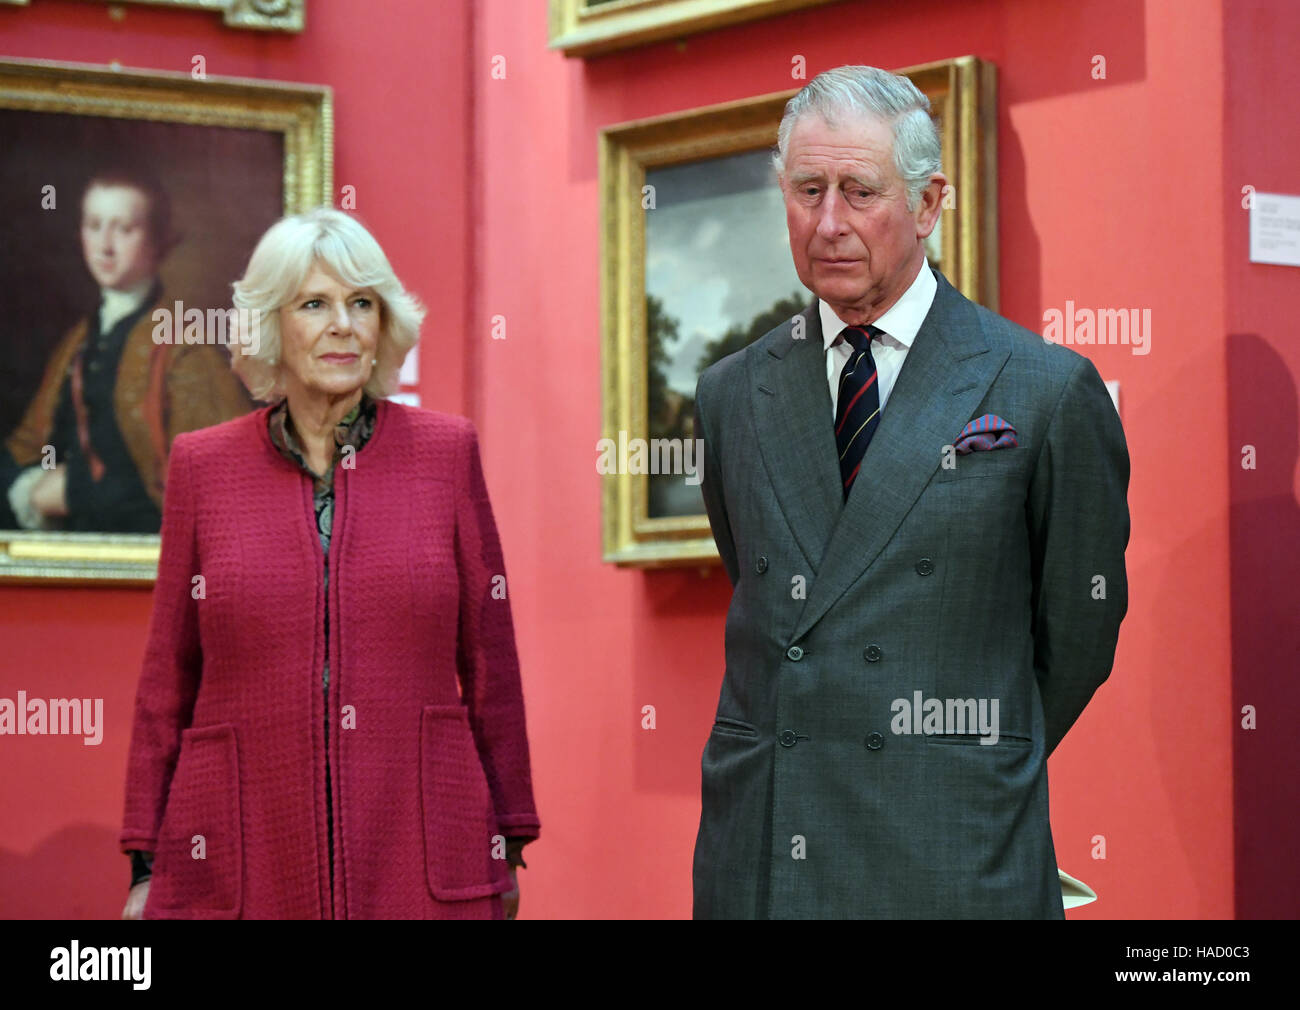 The Prince of Wales and the Duchess of Cornwall visit the University of Cambridge's Fitzwilliam Museum to mark its bicentenary and to celebrate the 600th anniversary of the Cambridge University Library. Stock Photo